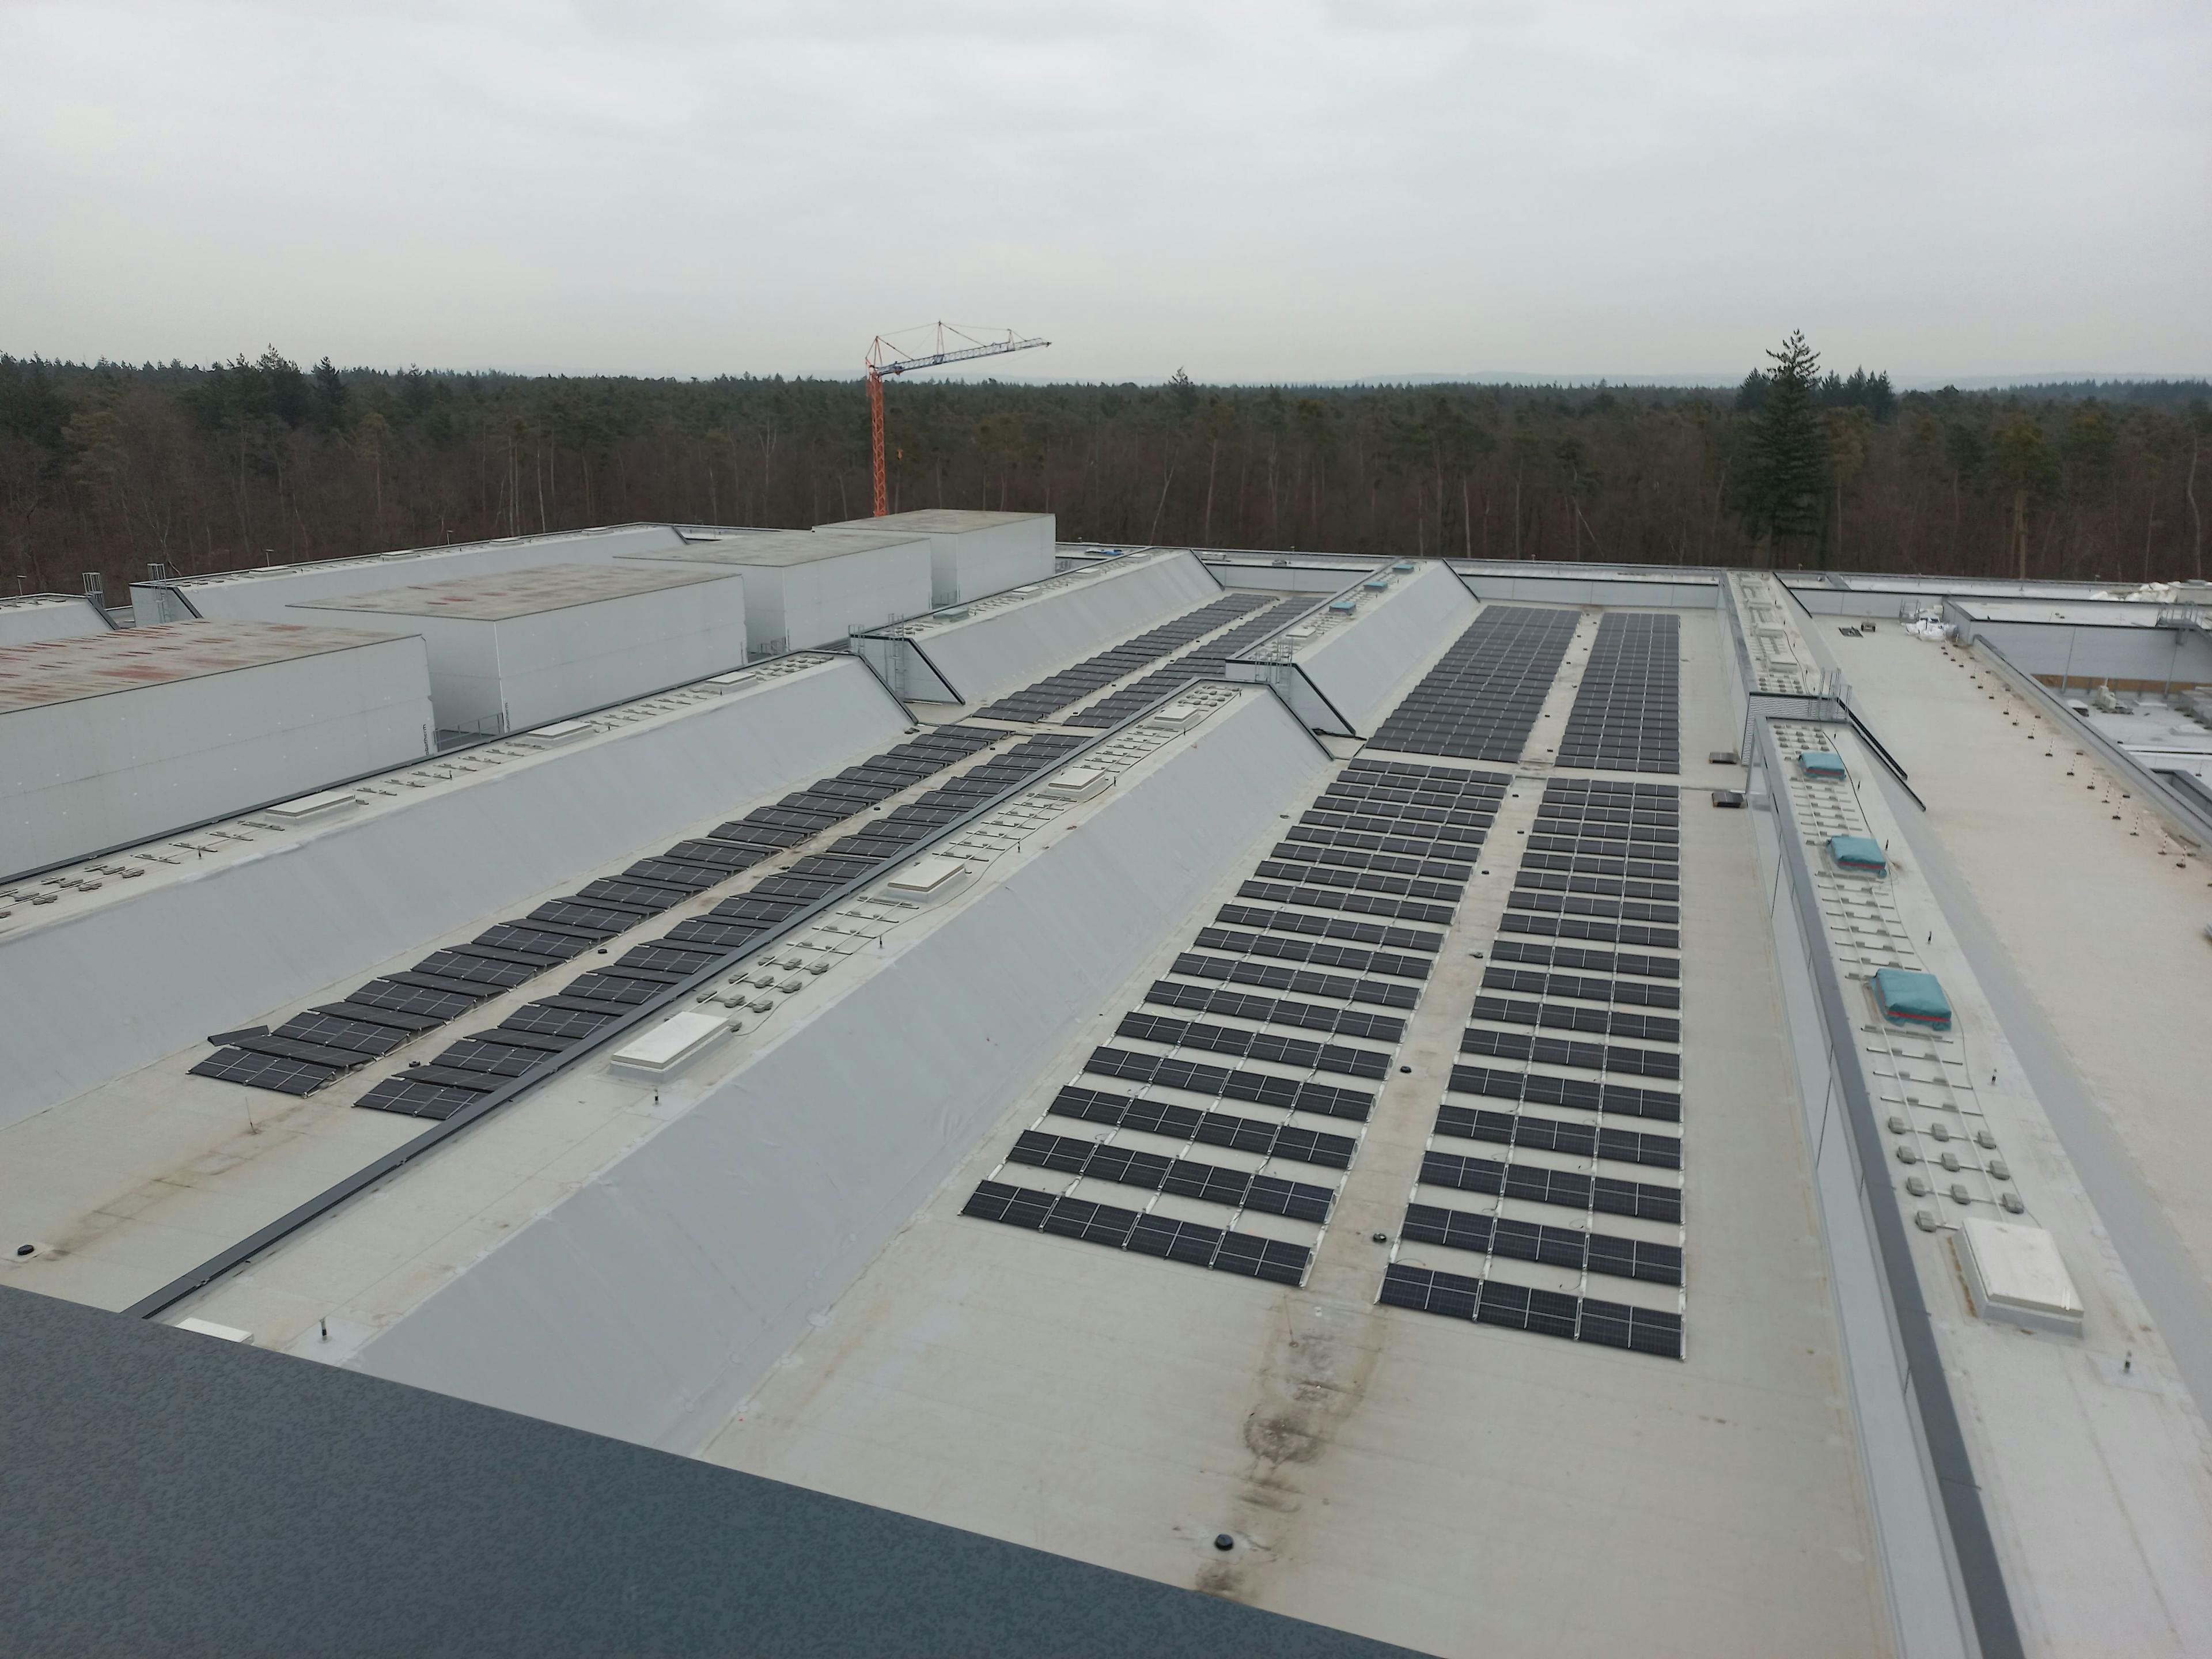 PV panels in Germany